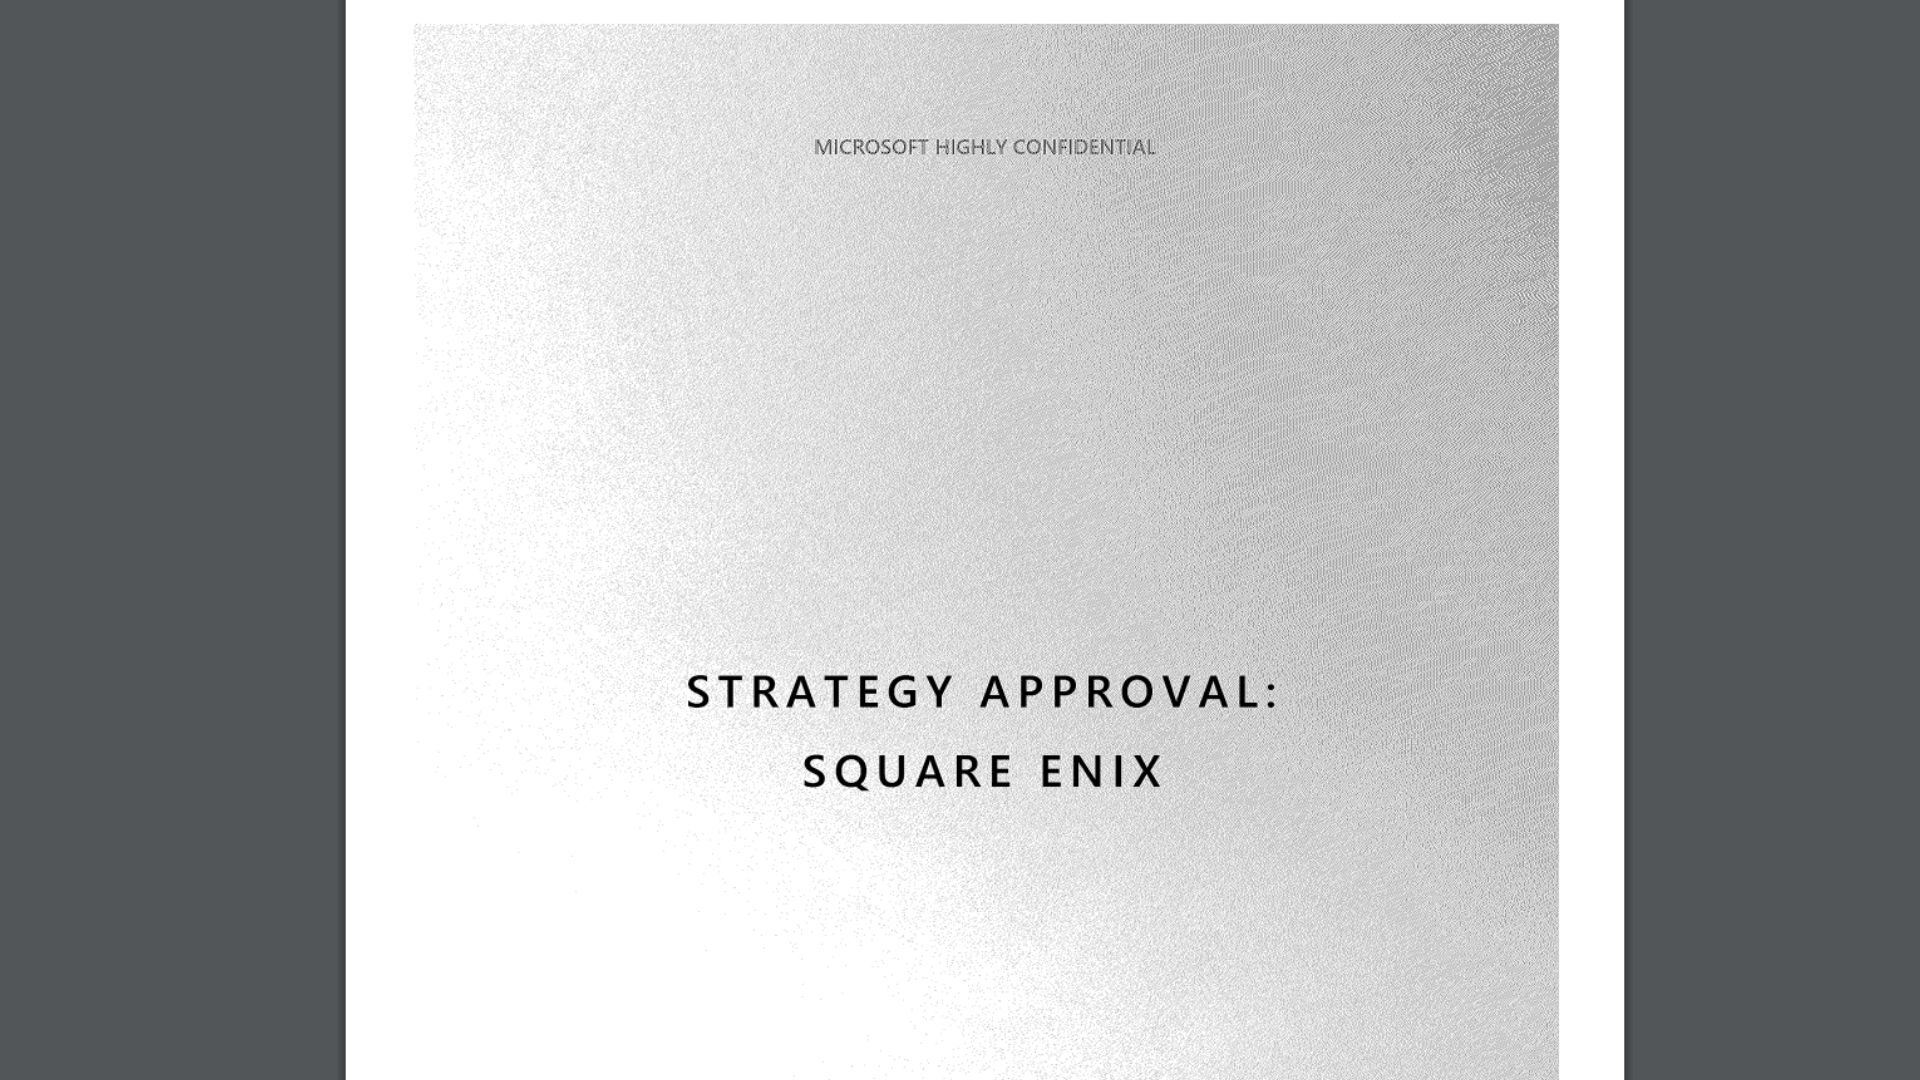 The cover of the released PDF detailing how Microsoft considered buying Square Enix